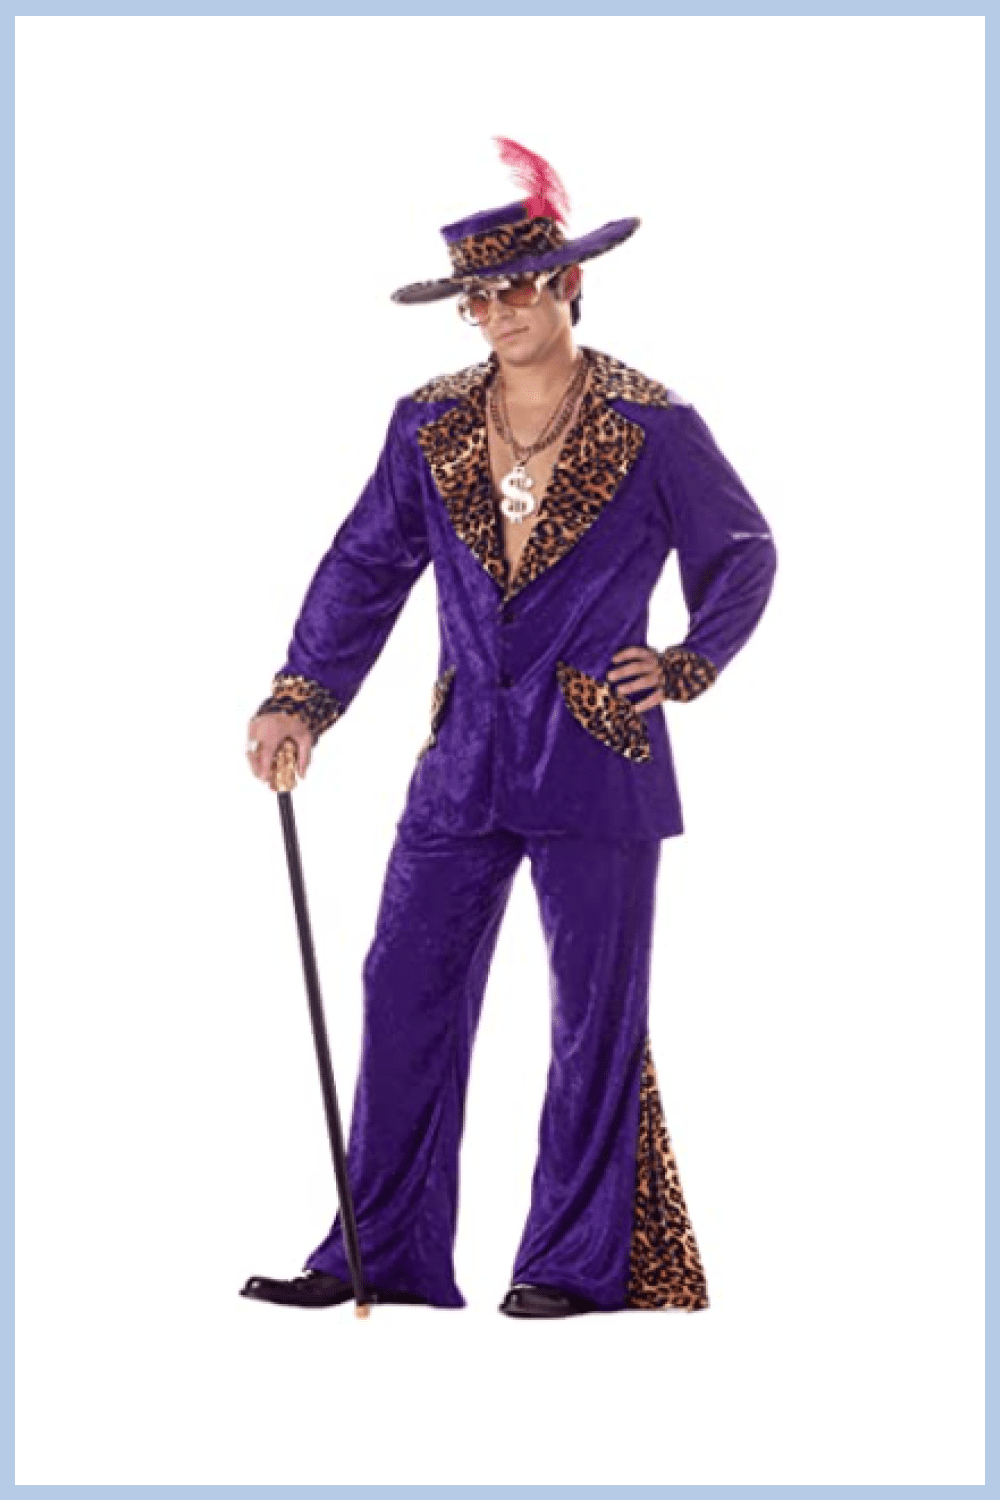 Stylish bright purple suit in the style of the 60s American stage.